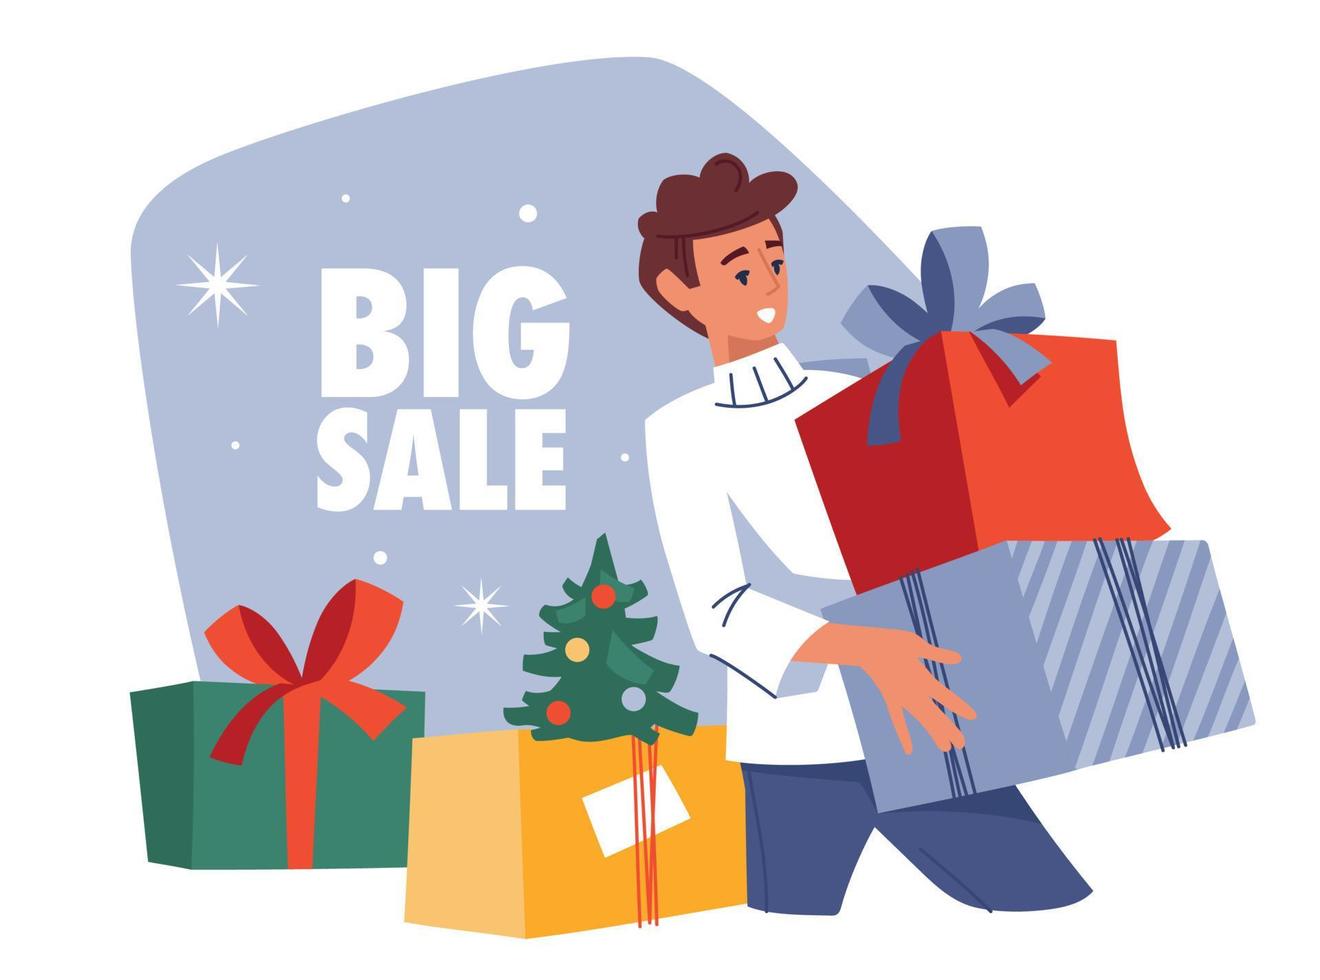 Winter sale. Man with a gift box. Preparing for Christmas. Vector image.